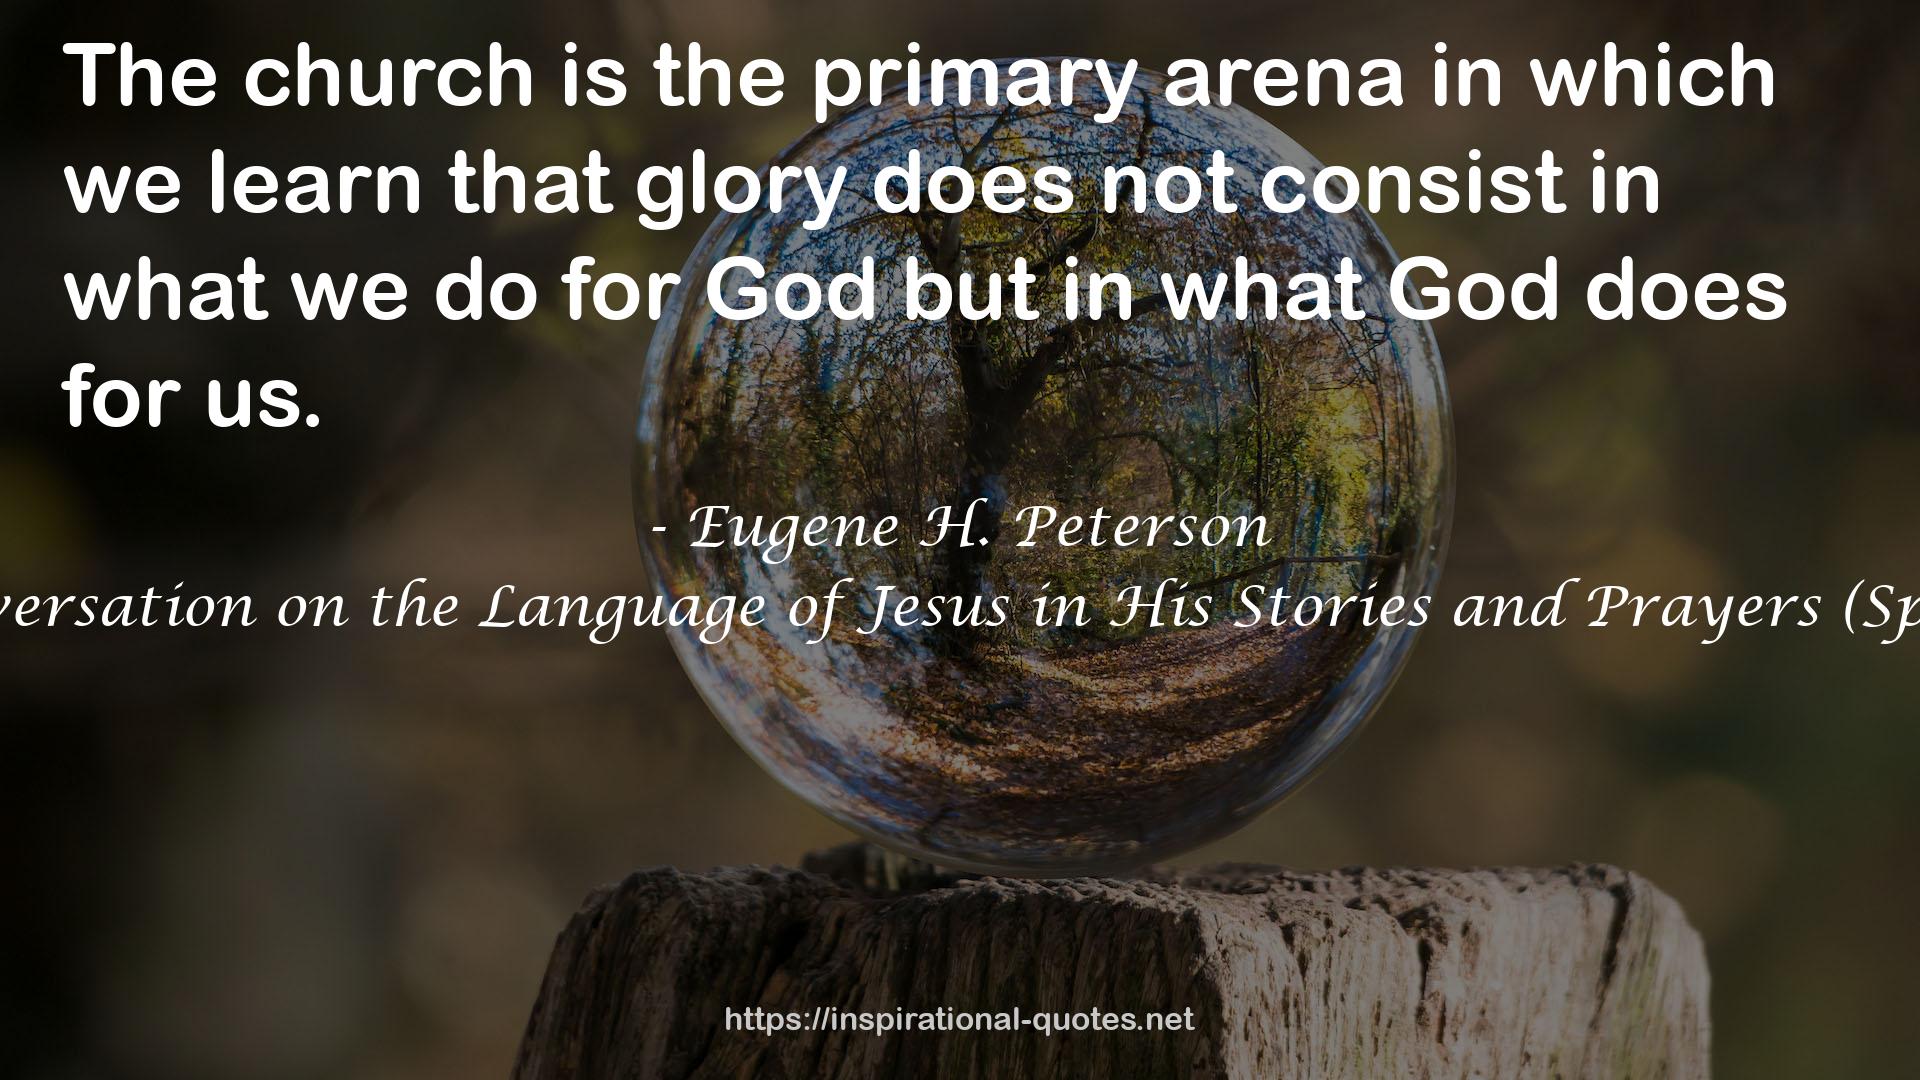 Eugene H. Peterson QUOTES